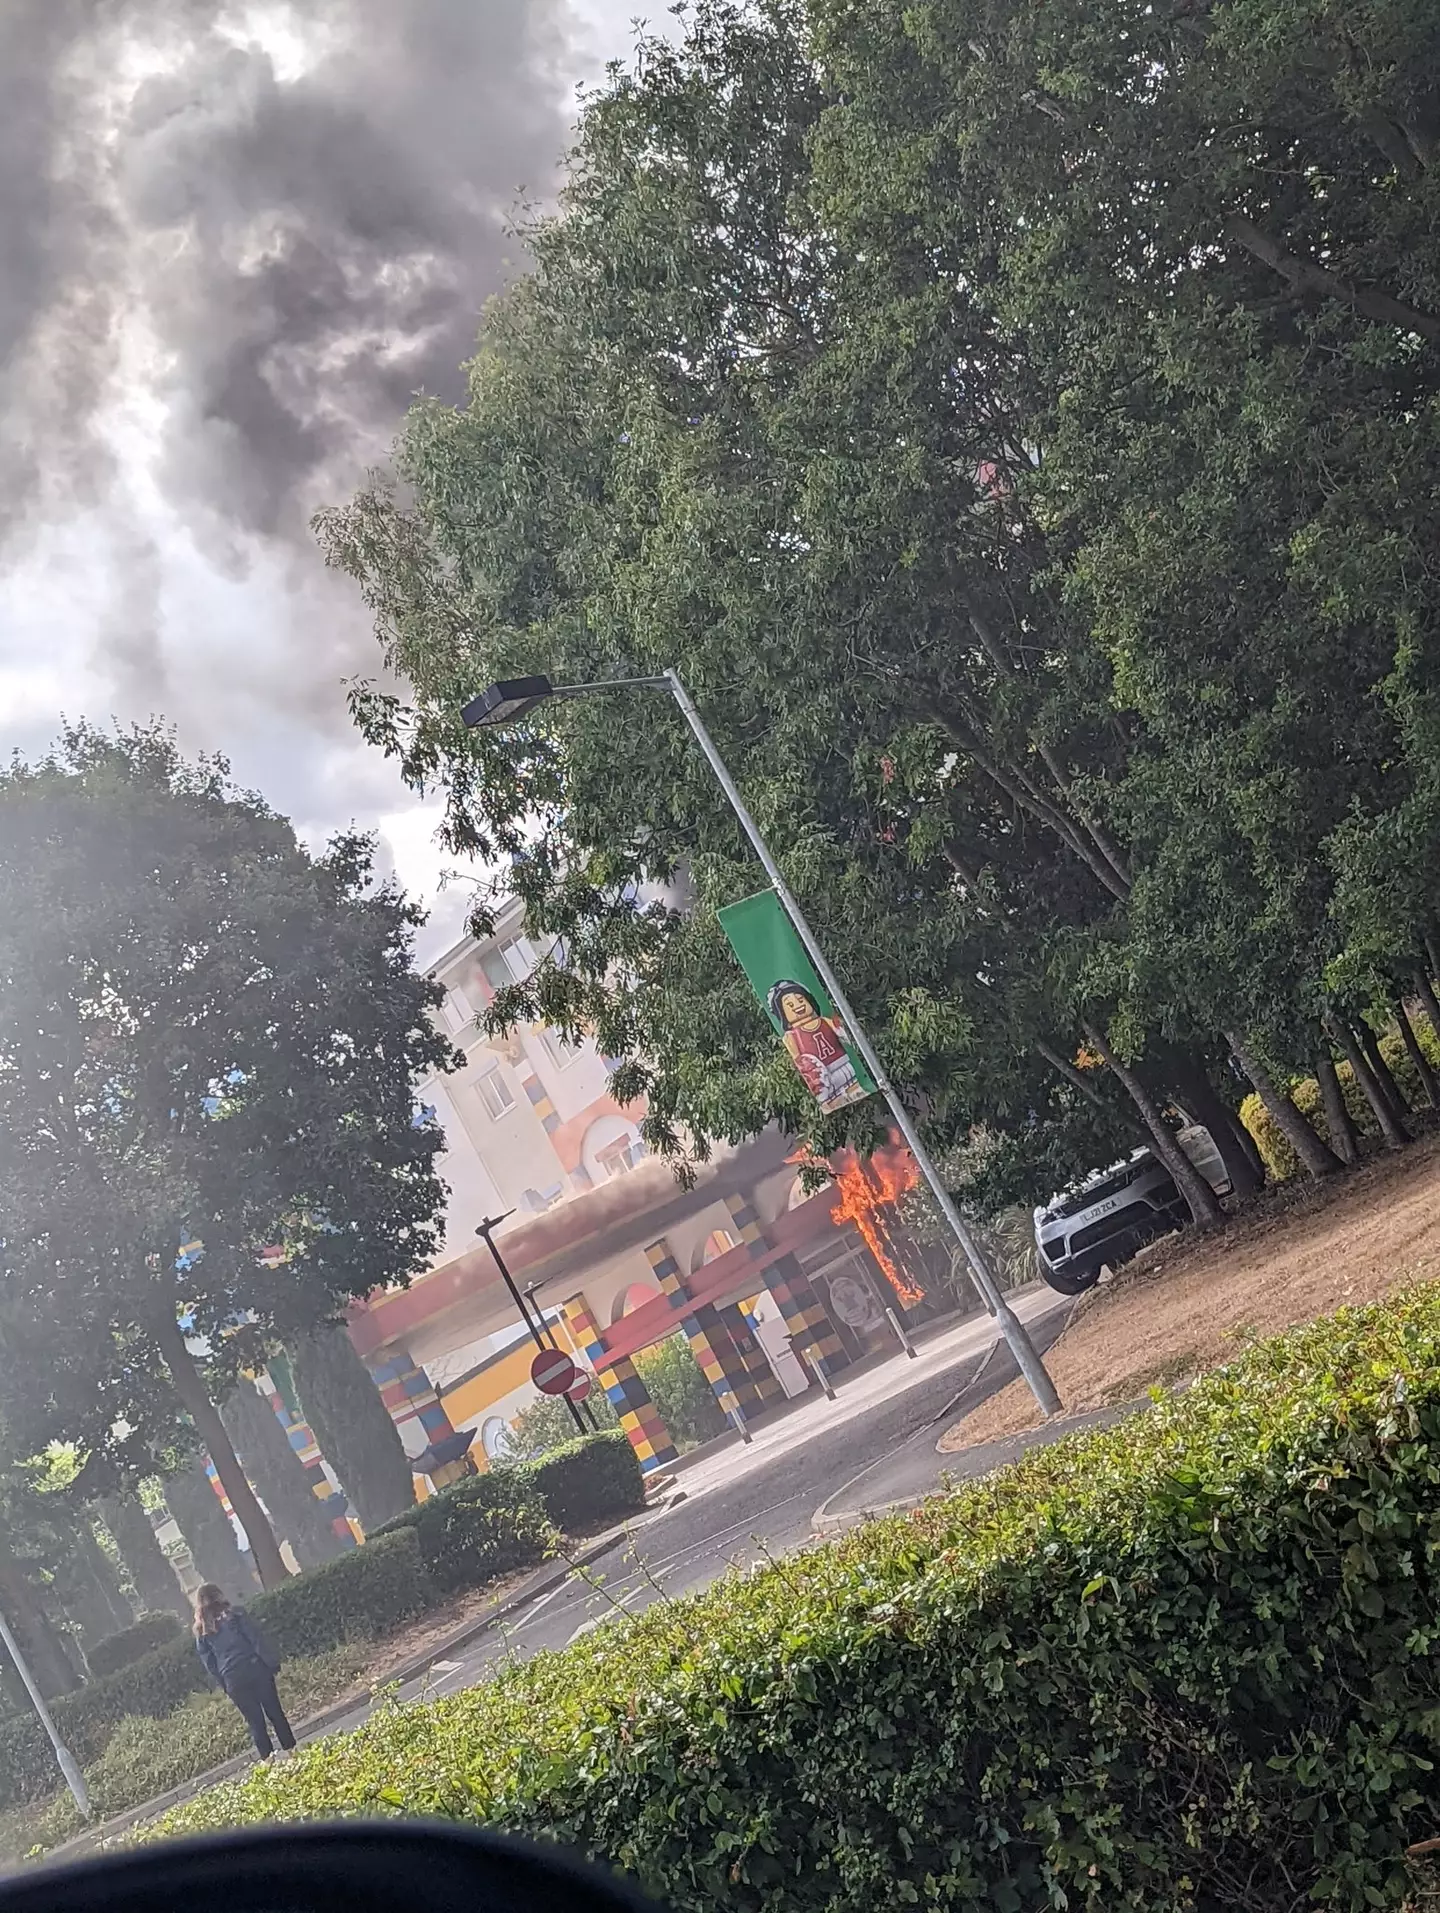 Theme park goers have been evacuated as a massive fire broke out at Legoland Windsor on Sunday.